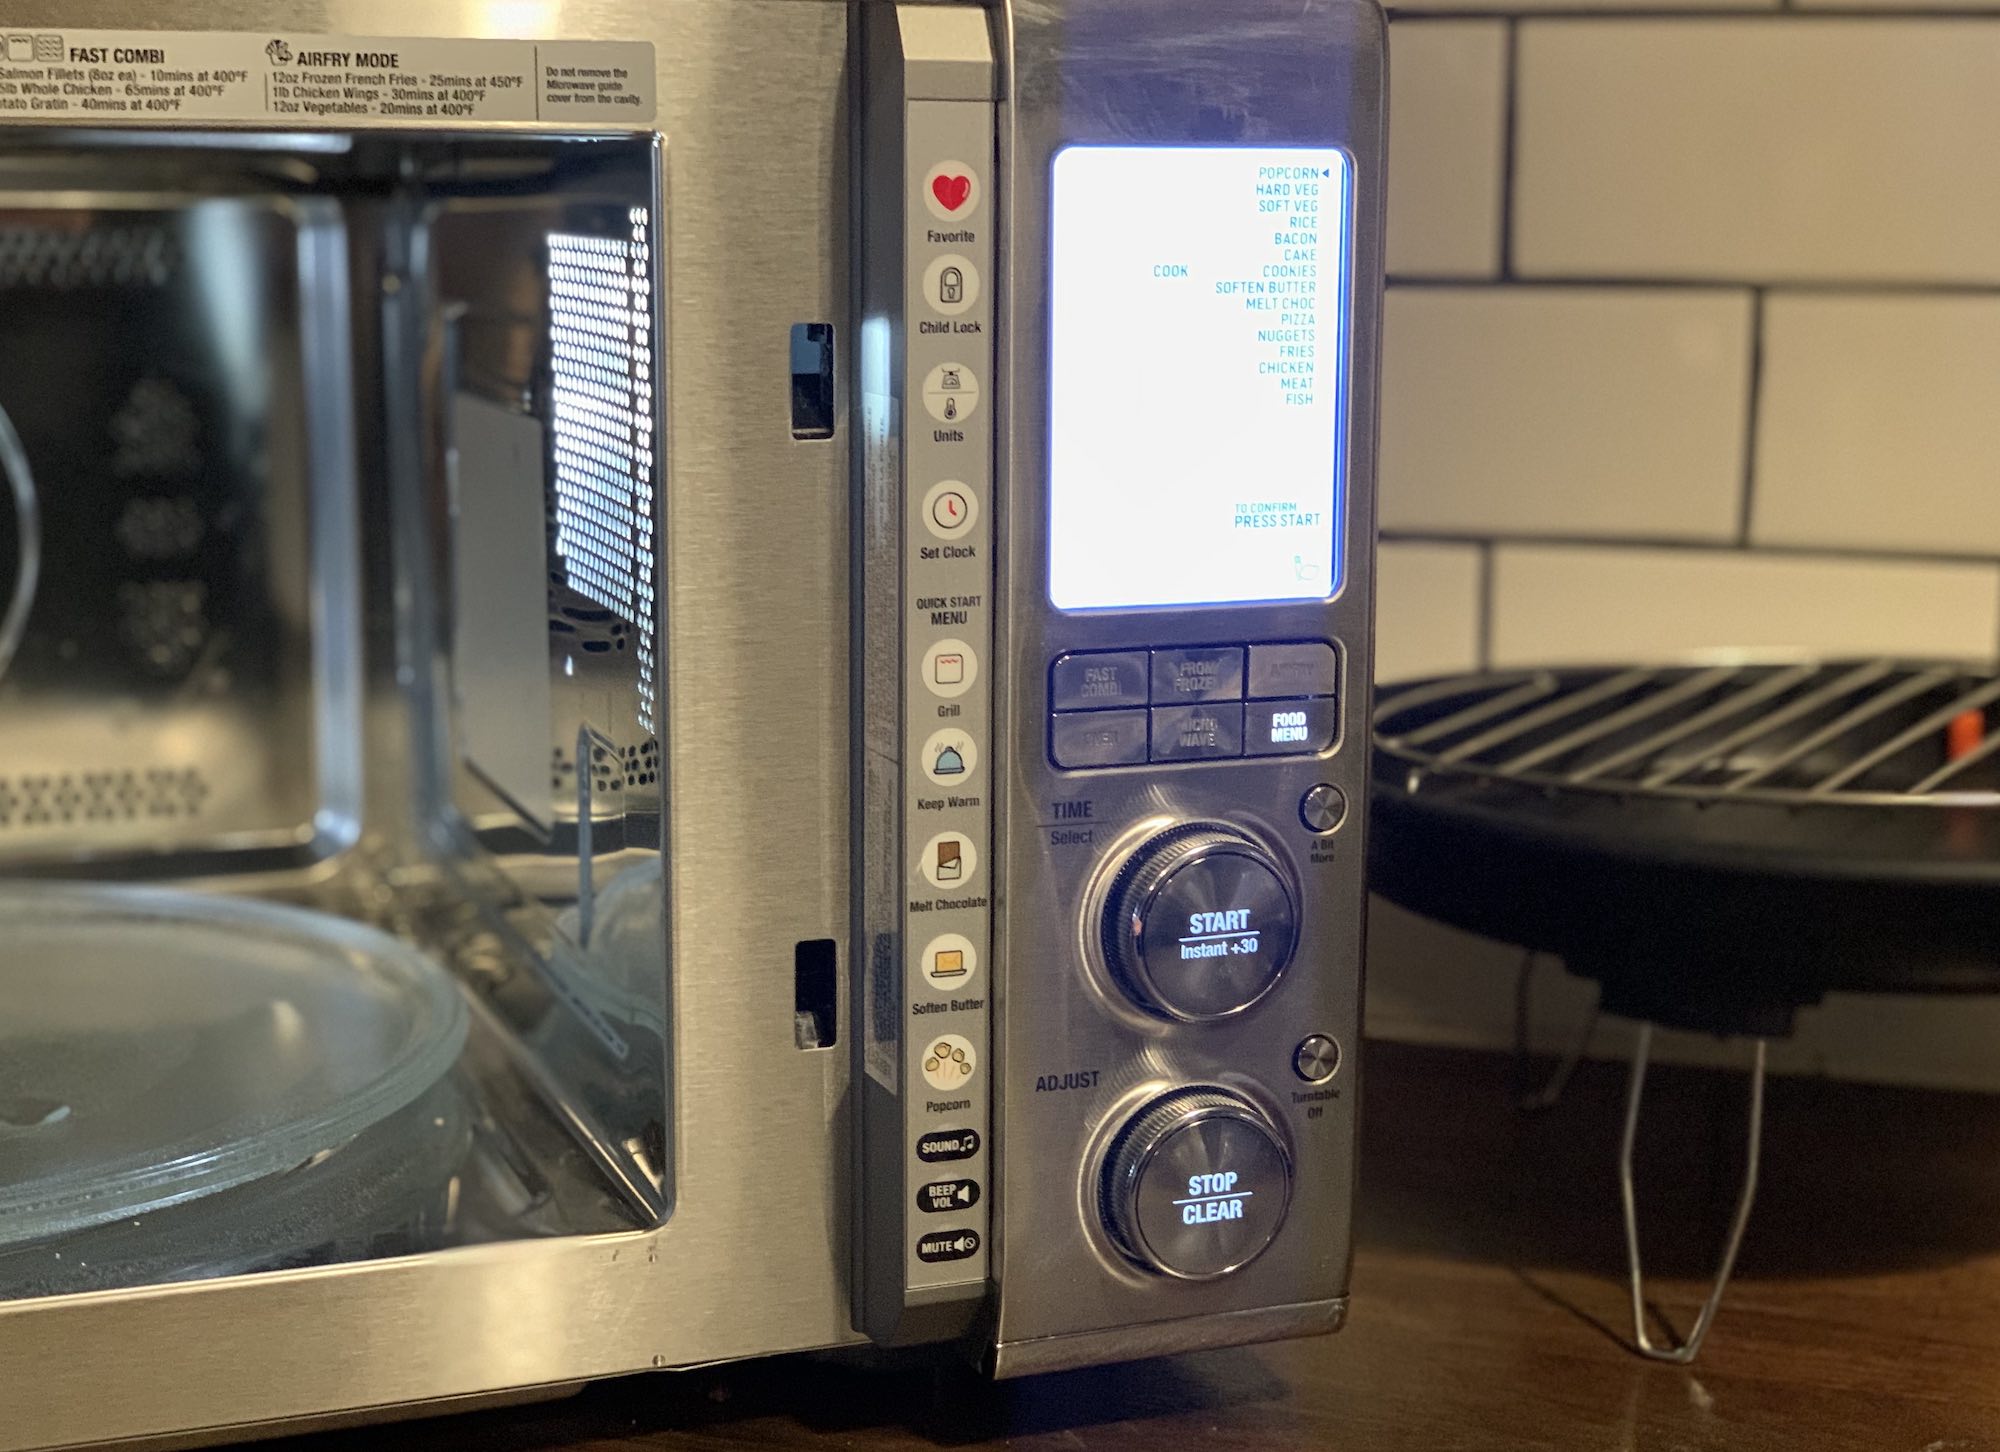 https://blog.bestbuy.ca/wp-content/uploads/2020/03/Breville-Countertop-Convection-Microwave-Review.jpg